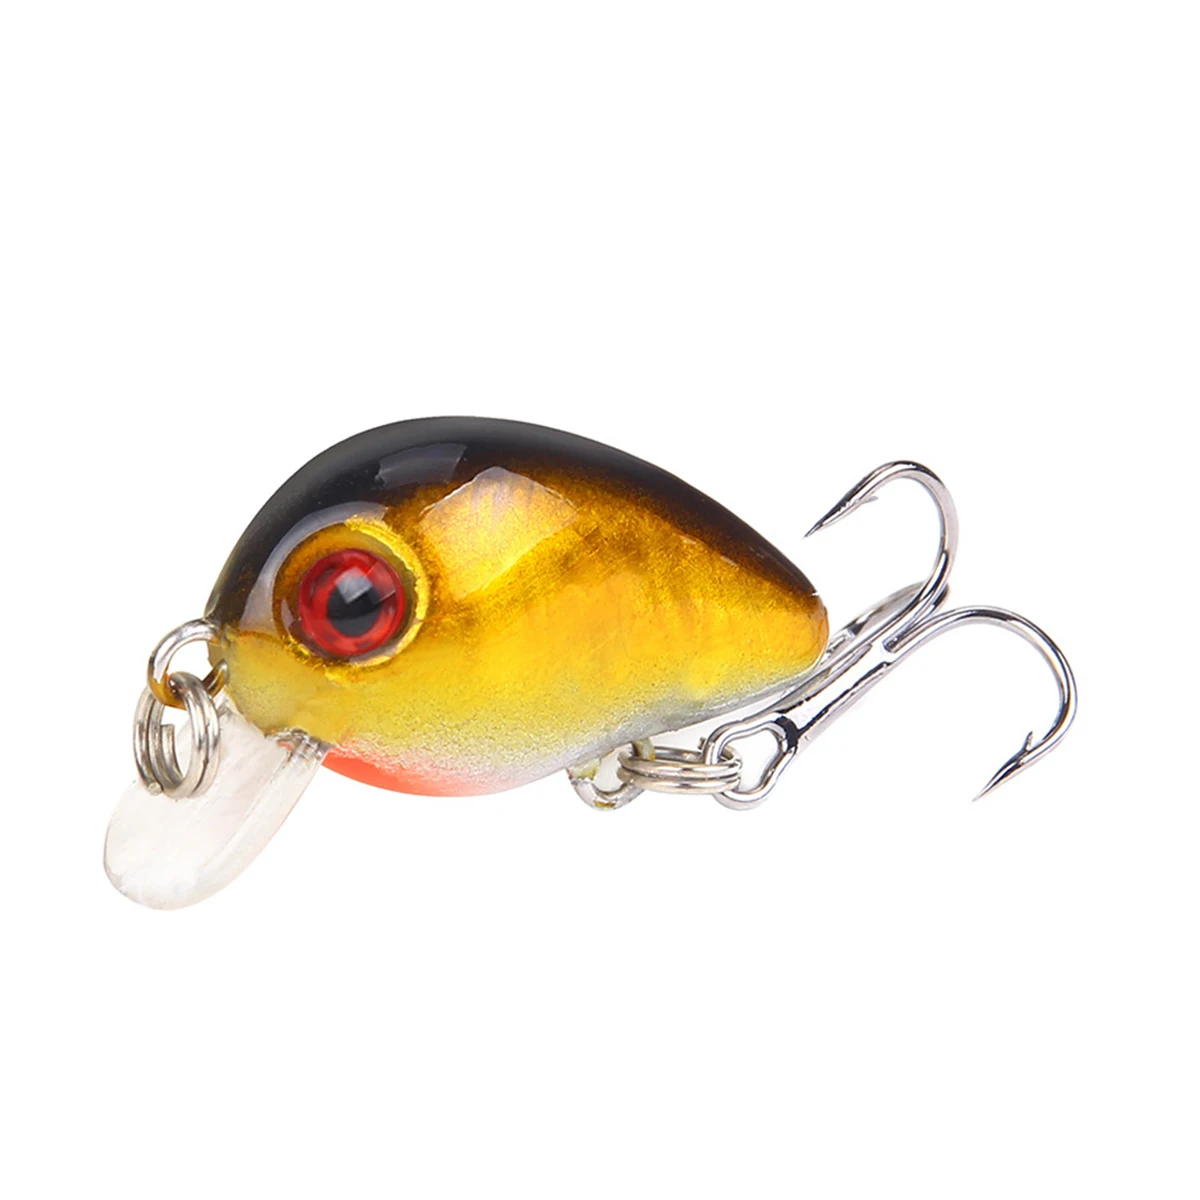 

Crankbaits 30mm 1.6g Fishing Lure Hard Baits Swimbaits Boat Ocean Topwater Lures Fishing Tackle for Trout Bass Perch, 10 available colors to choose